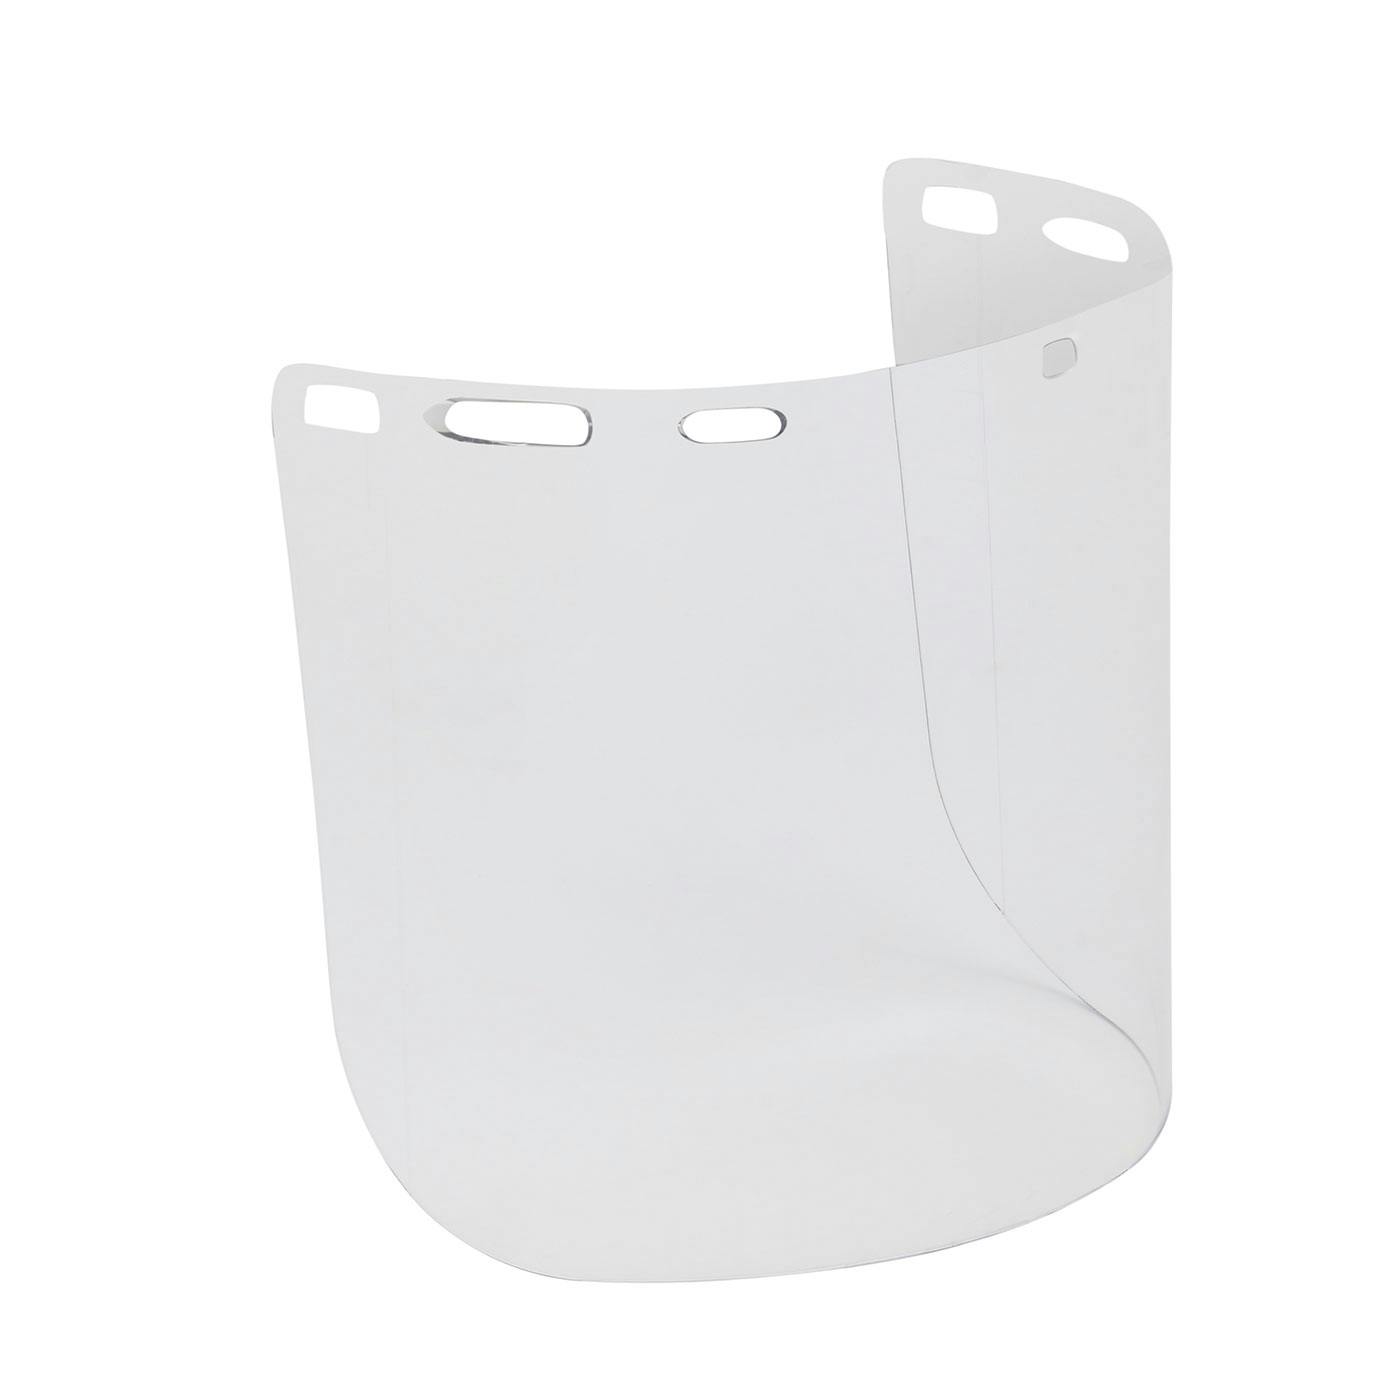 Uncoated Polycarbonate Safety Visor - Clear, Clear (251-01-7301) - OS_1